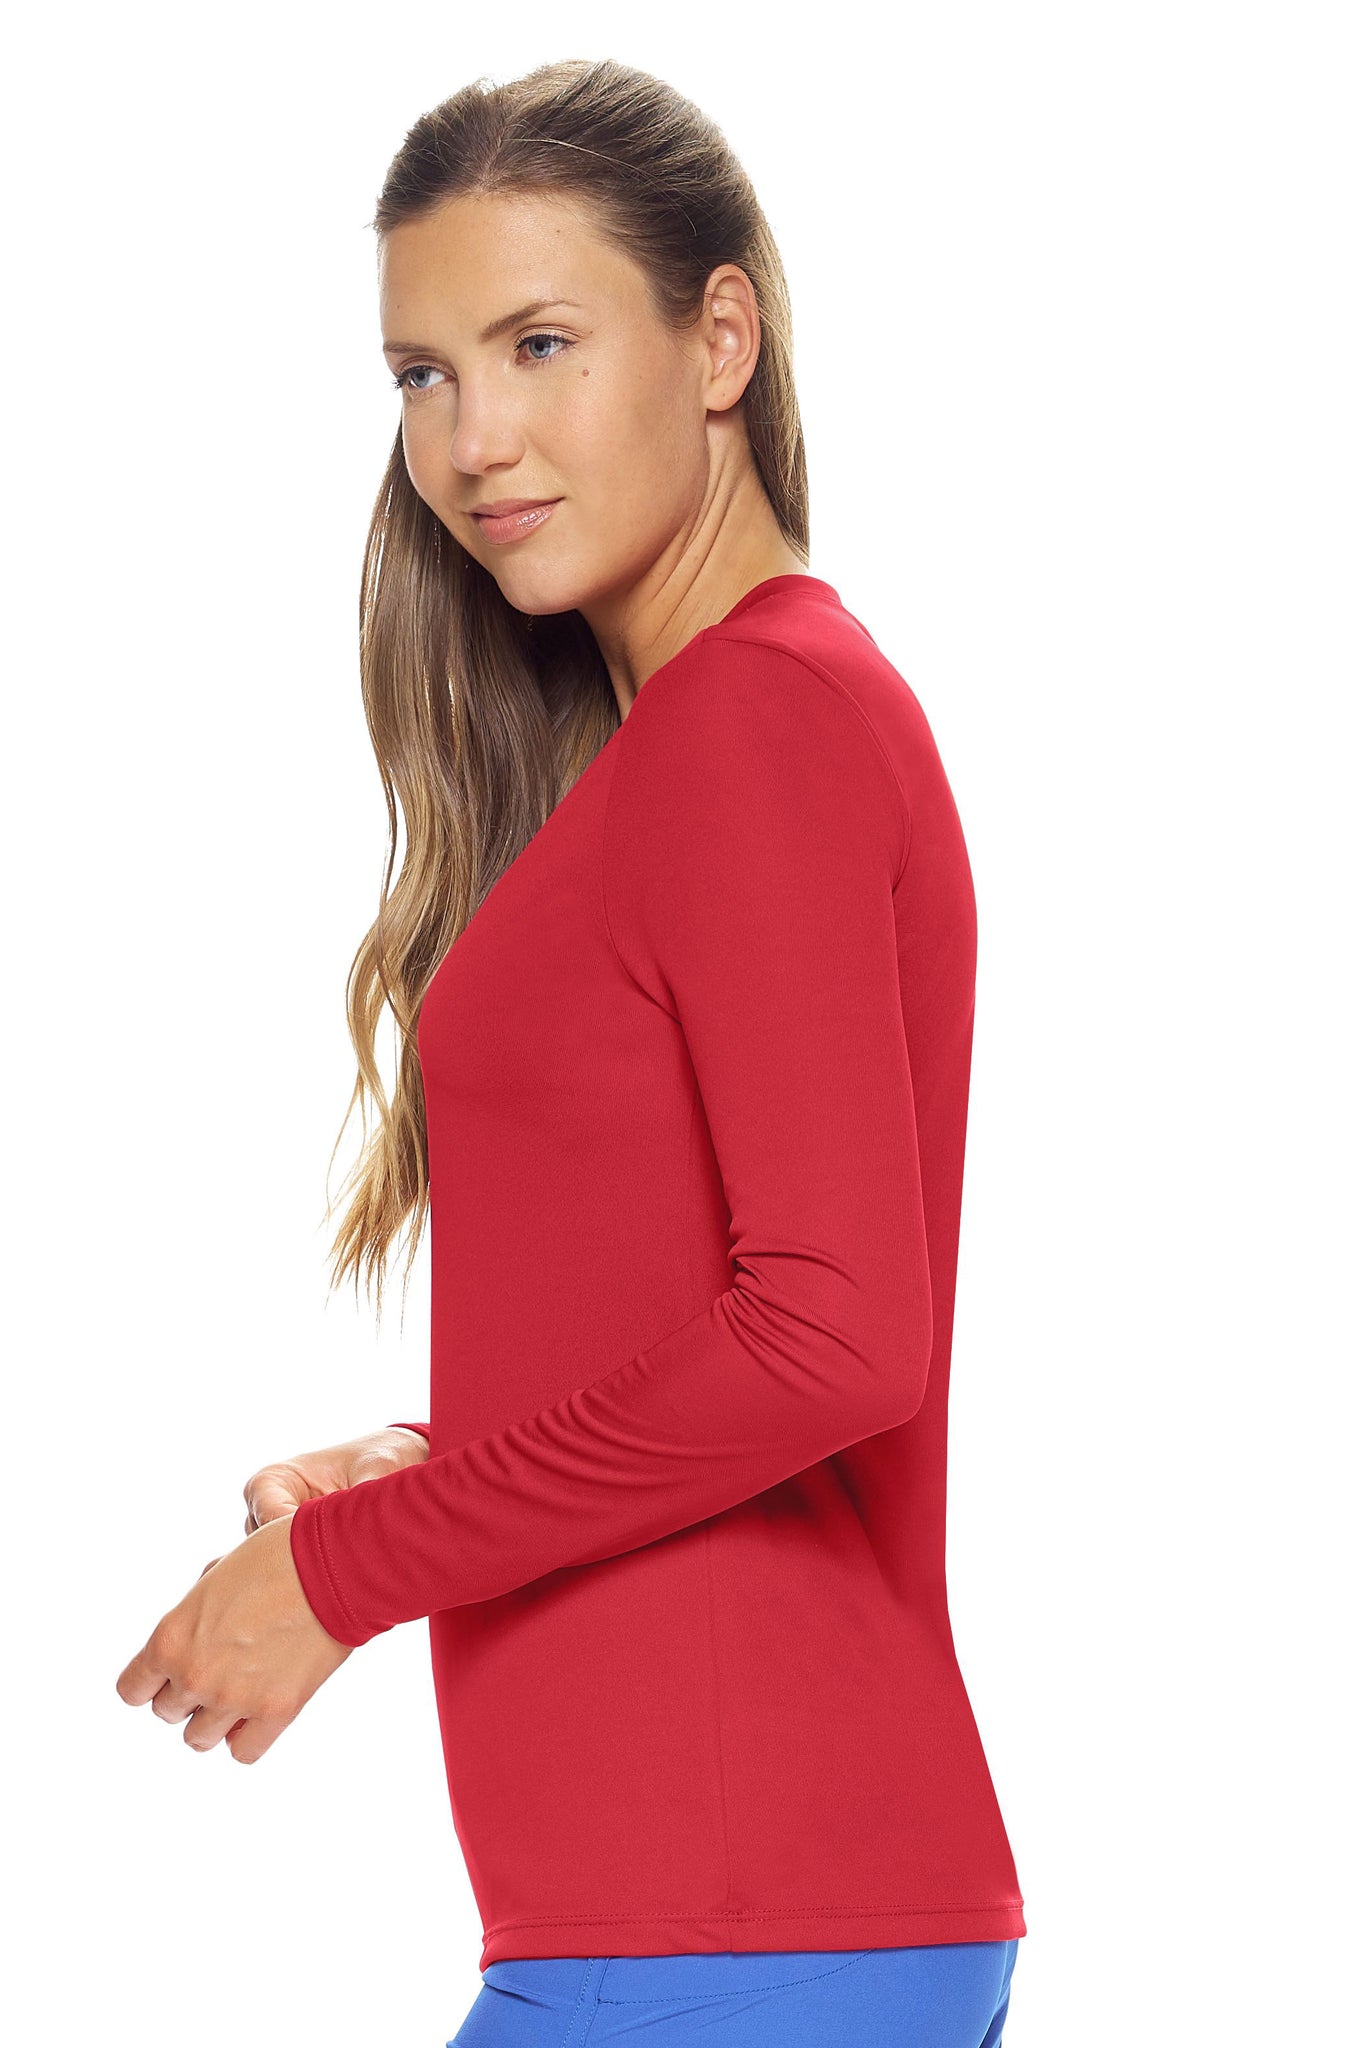 Expert Brand Wholesale Best Blanks Made in USA Activewear Performance pk MaX™ V-Neck Long Sleeve Expert Tee True Red 2#red